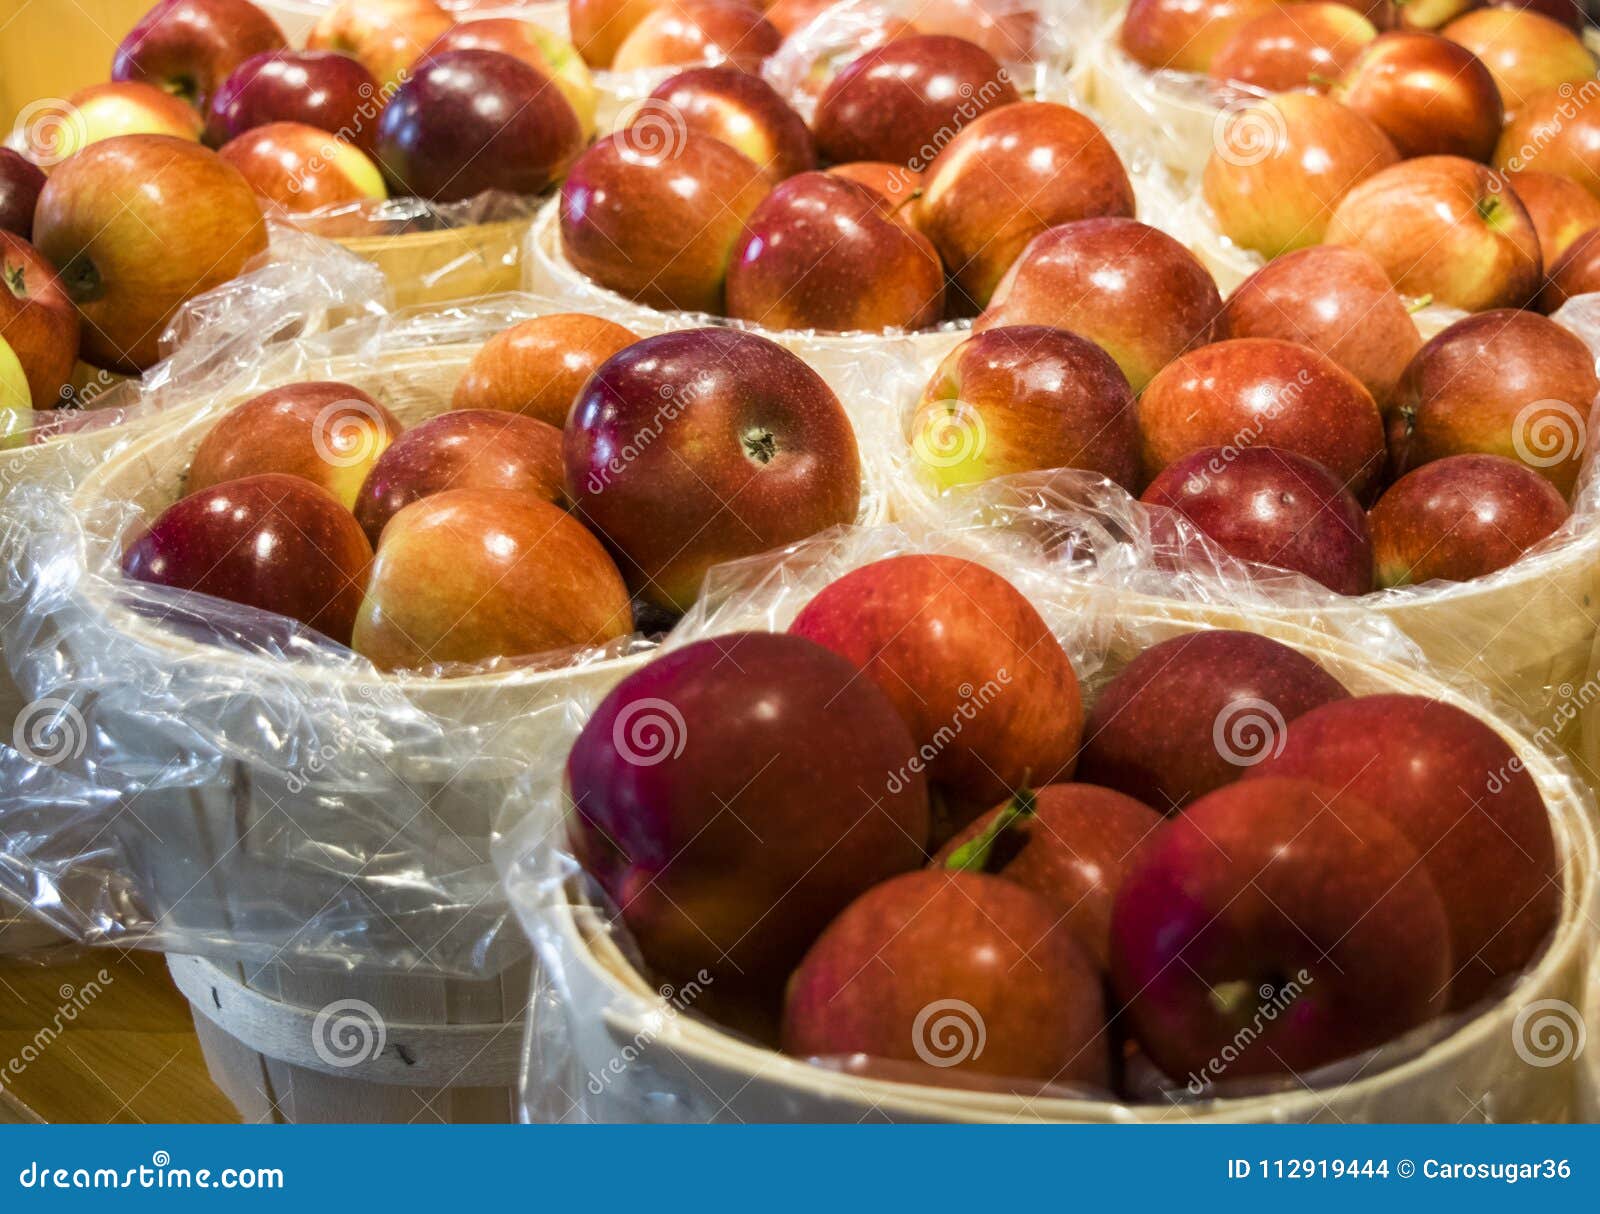 big and tasty red apples in baskets